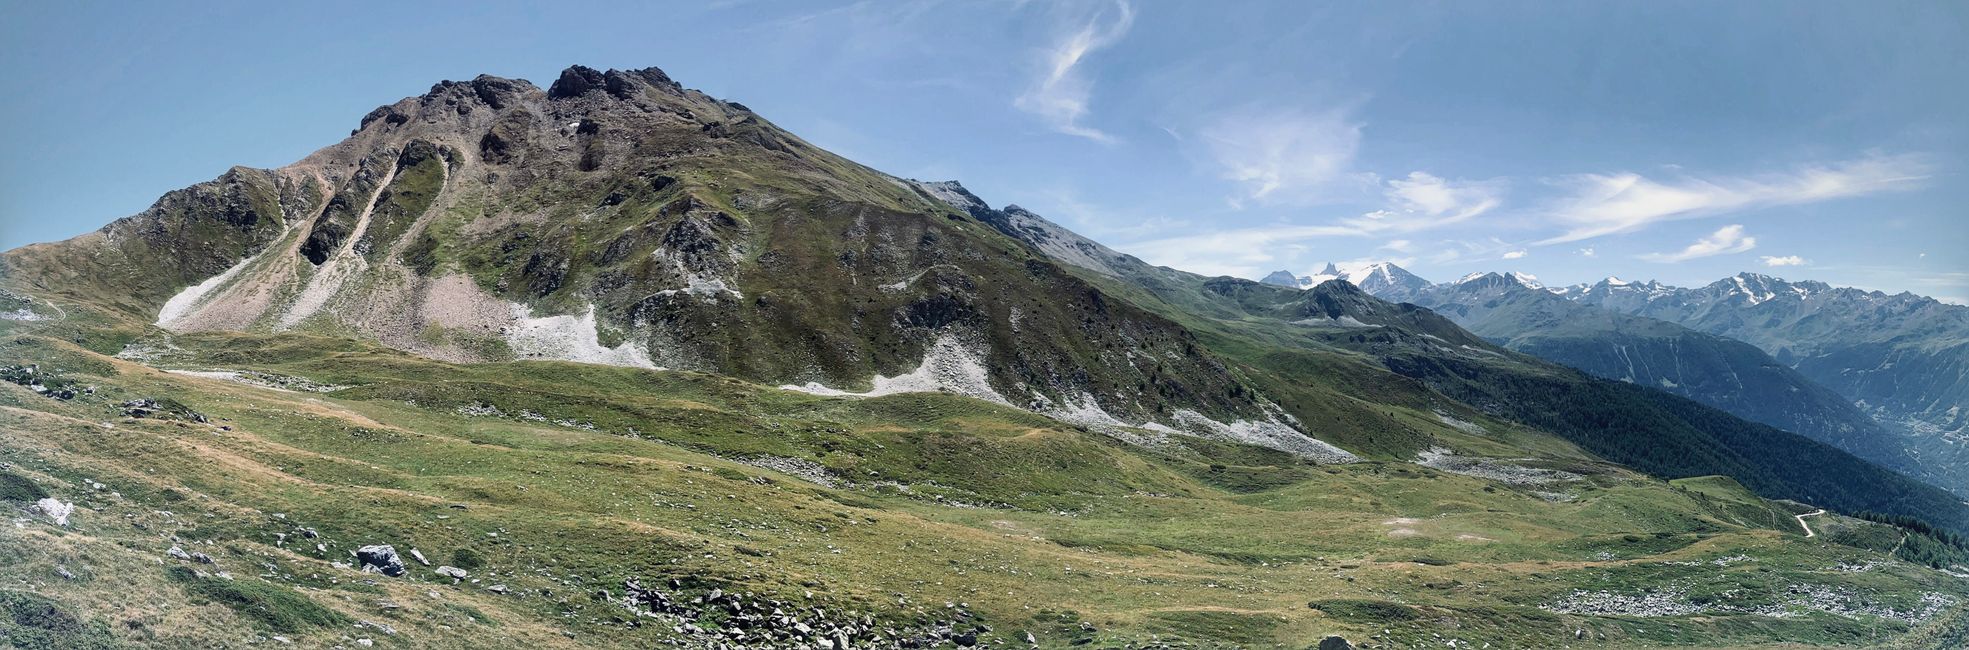 Col du Cou pass, the starting point of the trail